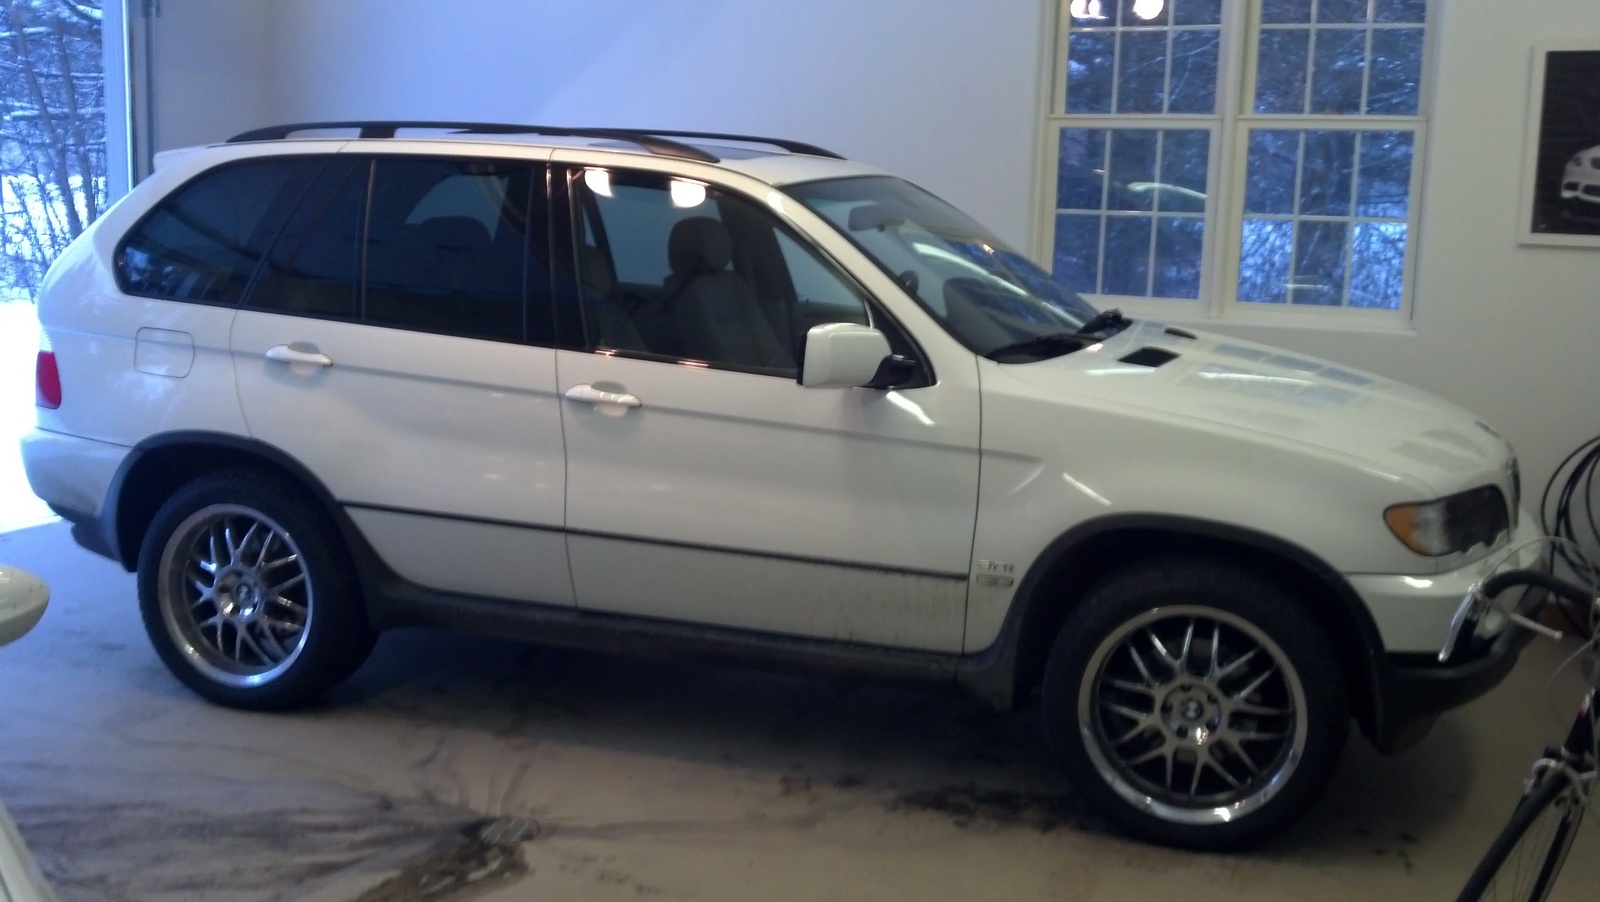 Used bmw x5 for sale in wisconsin #7